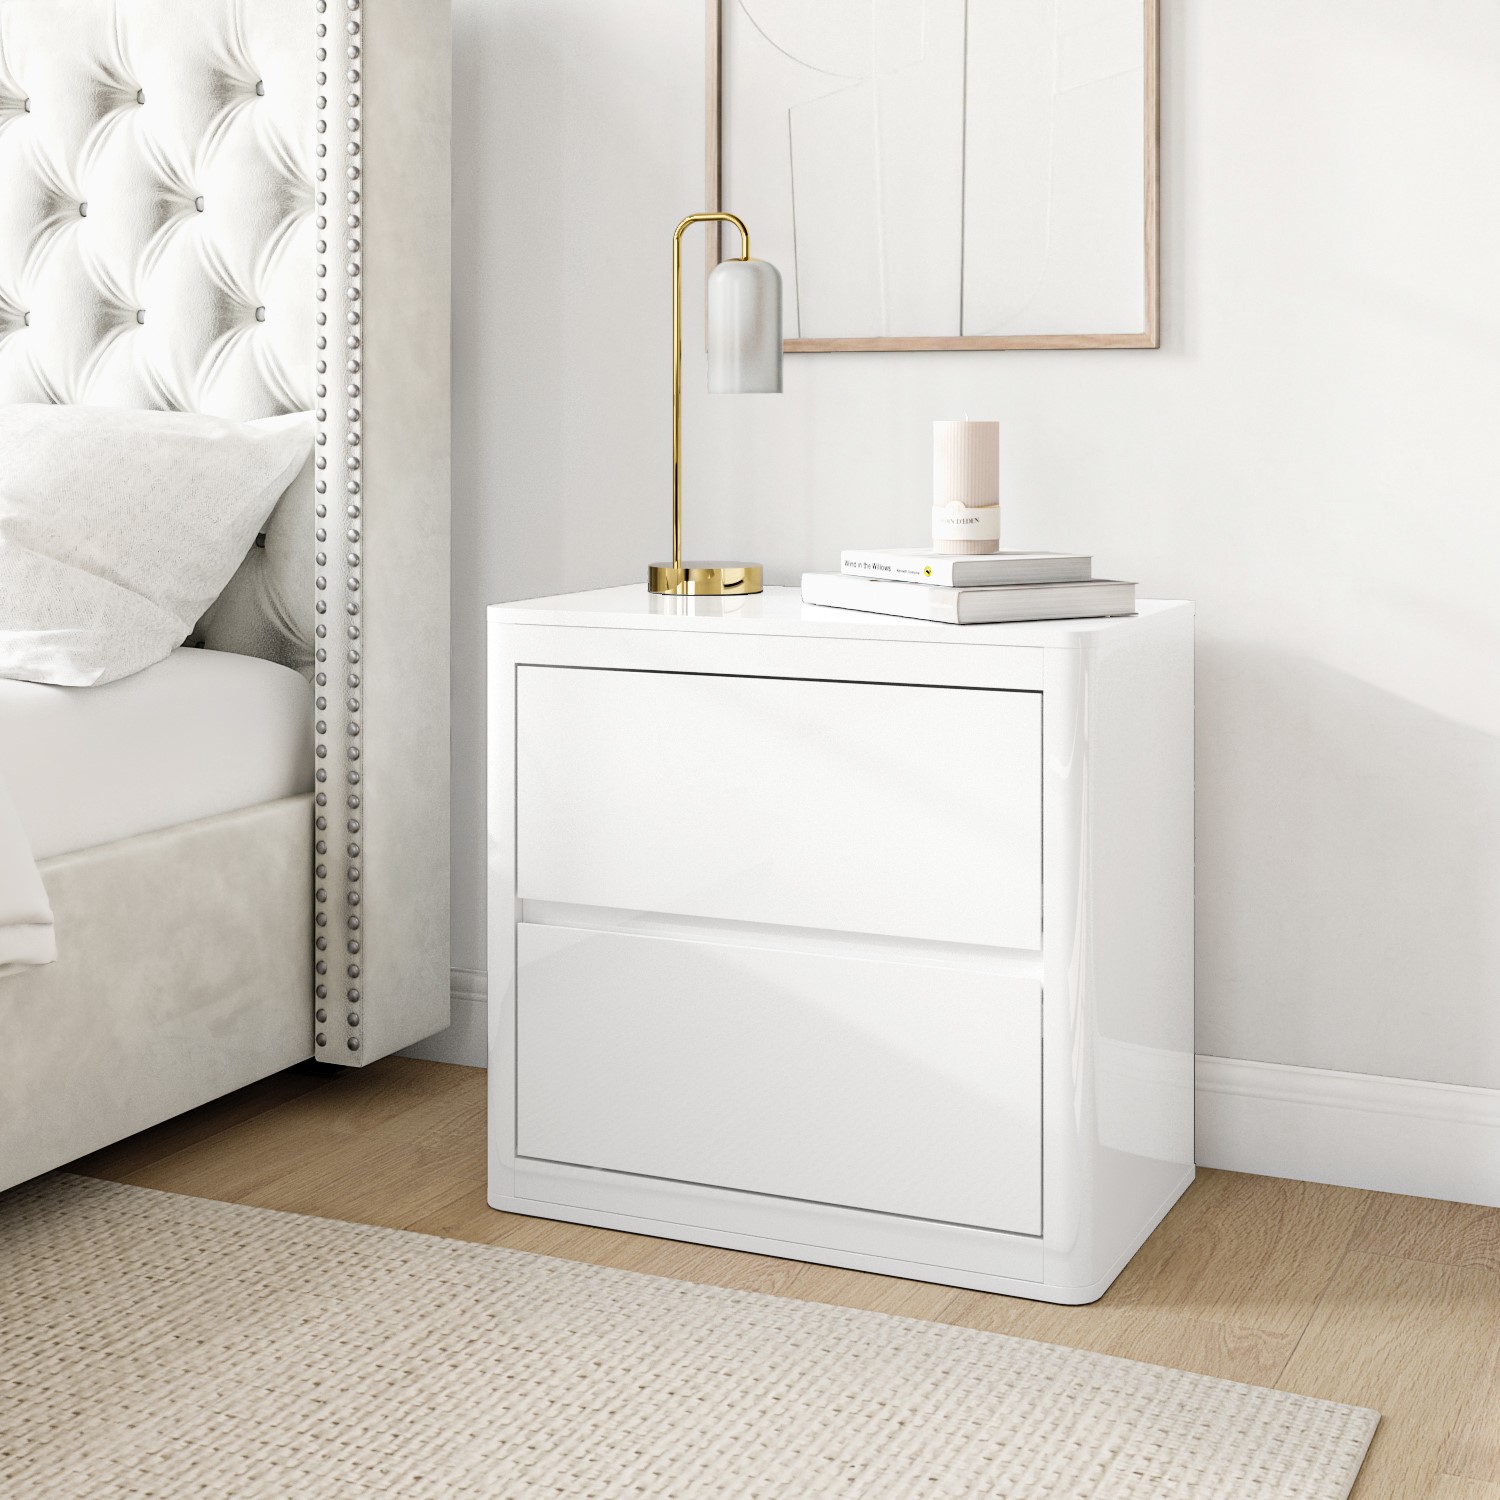 GRADE A2 - Lexi White High Gloss 2 Drawer Bedside Table - Furniture123